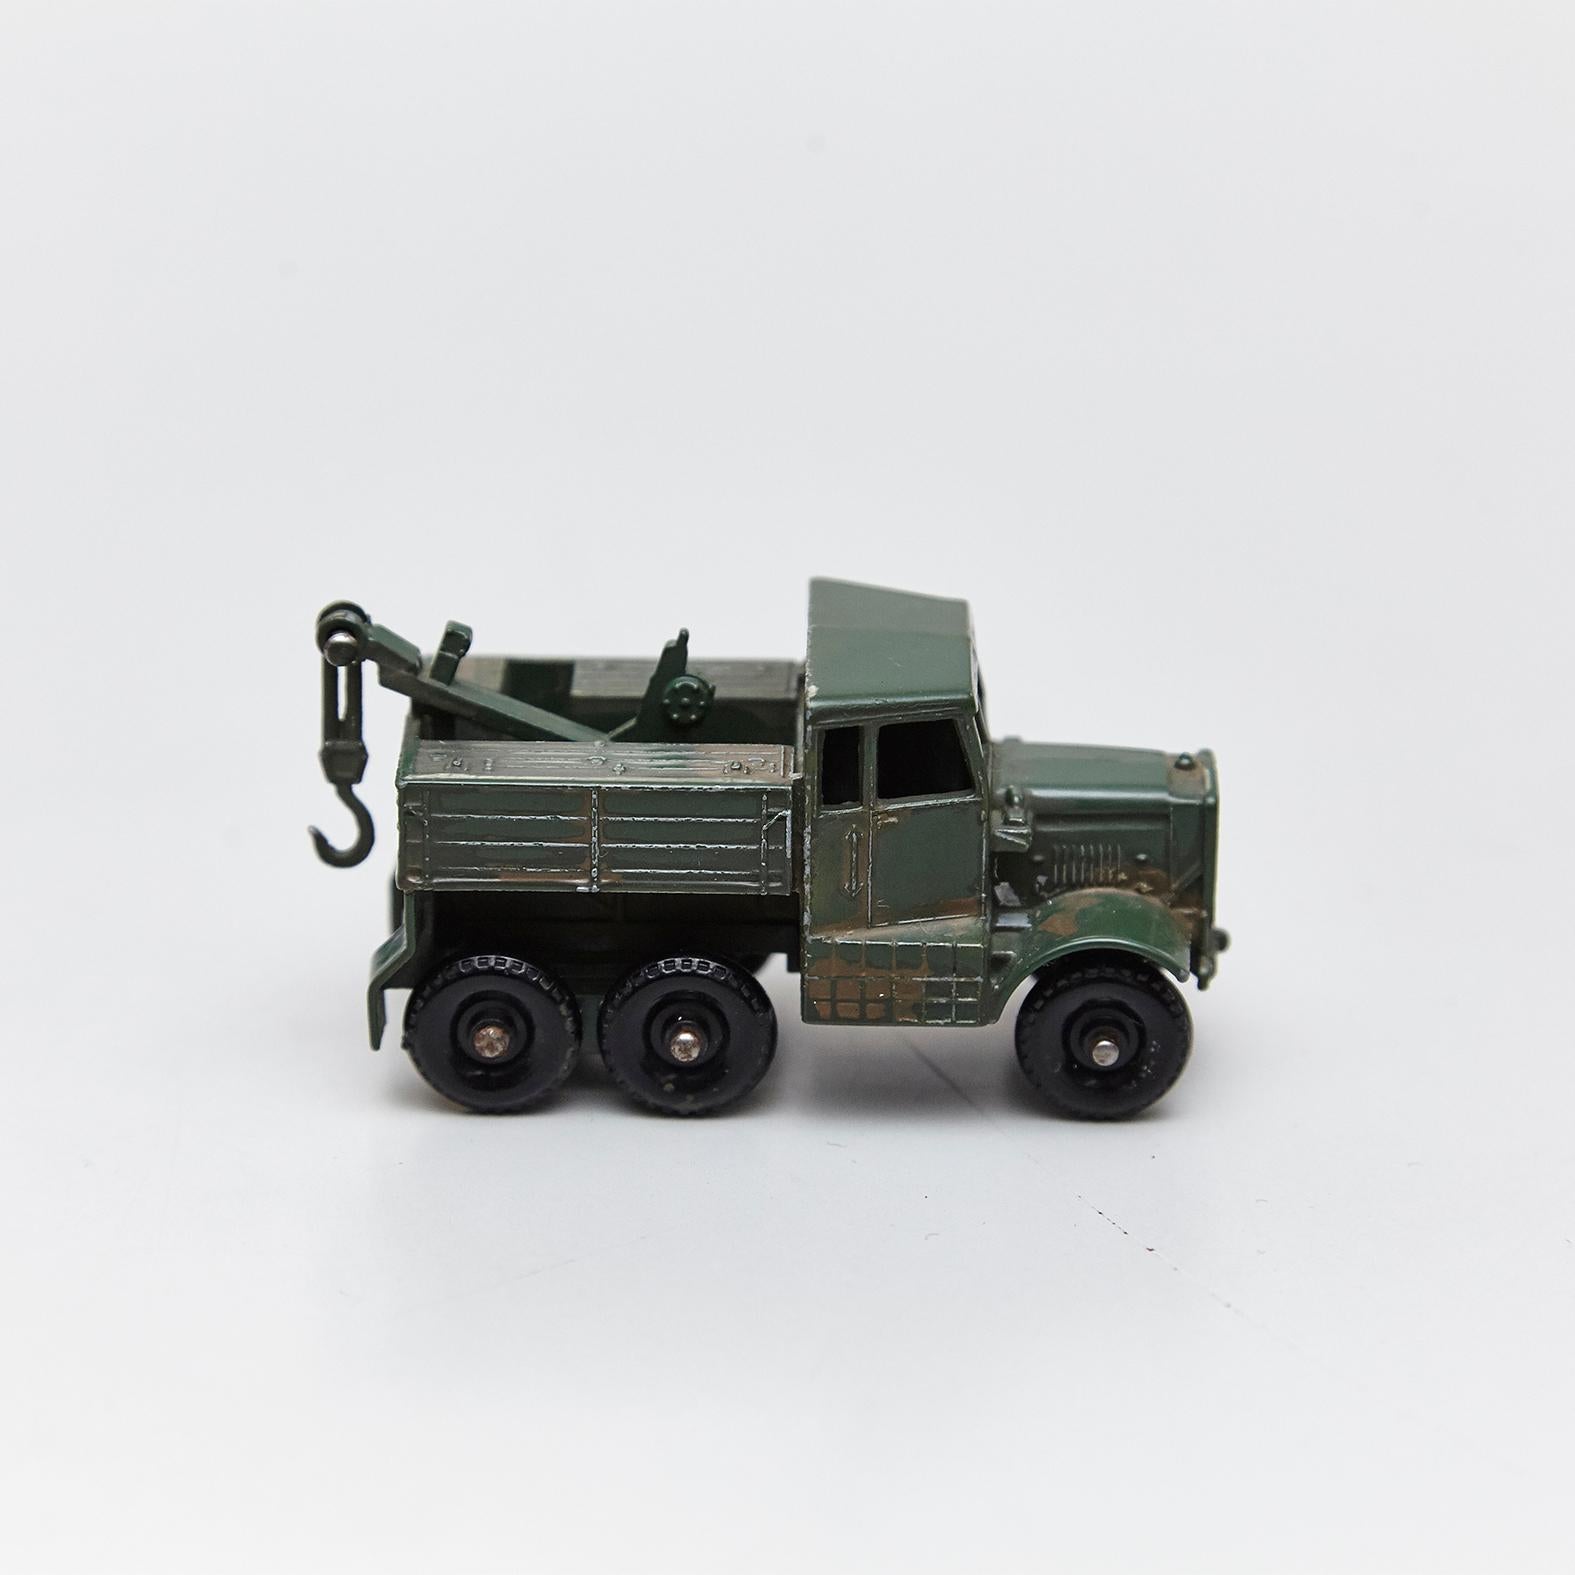 Lesney Matchboxes Series Antique Metal Toy Cars Green Military, Free Shipping 5